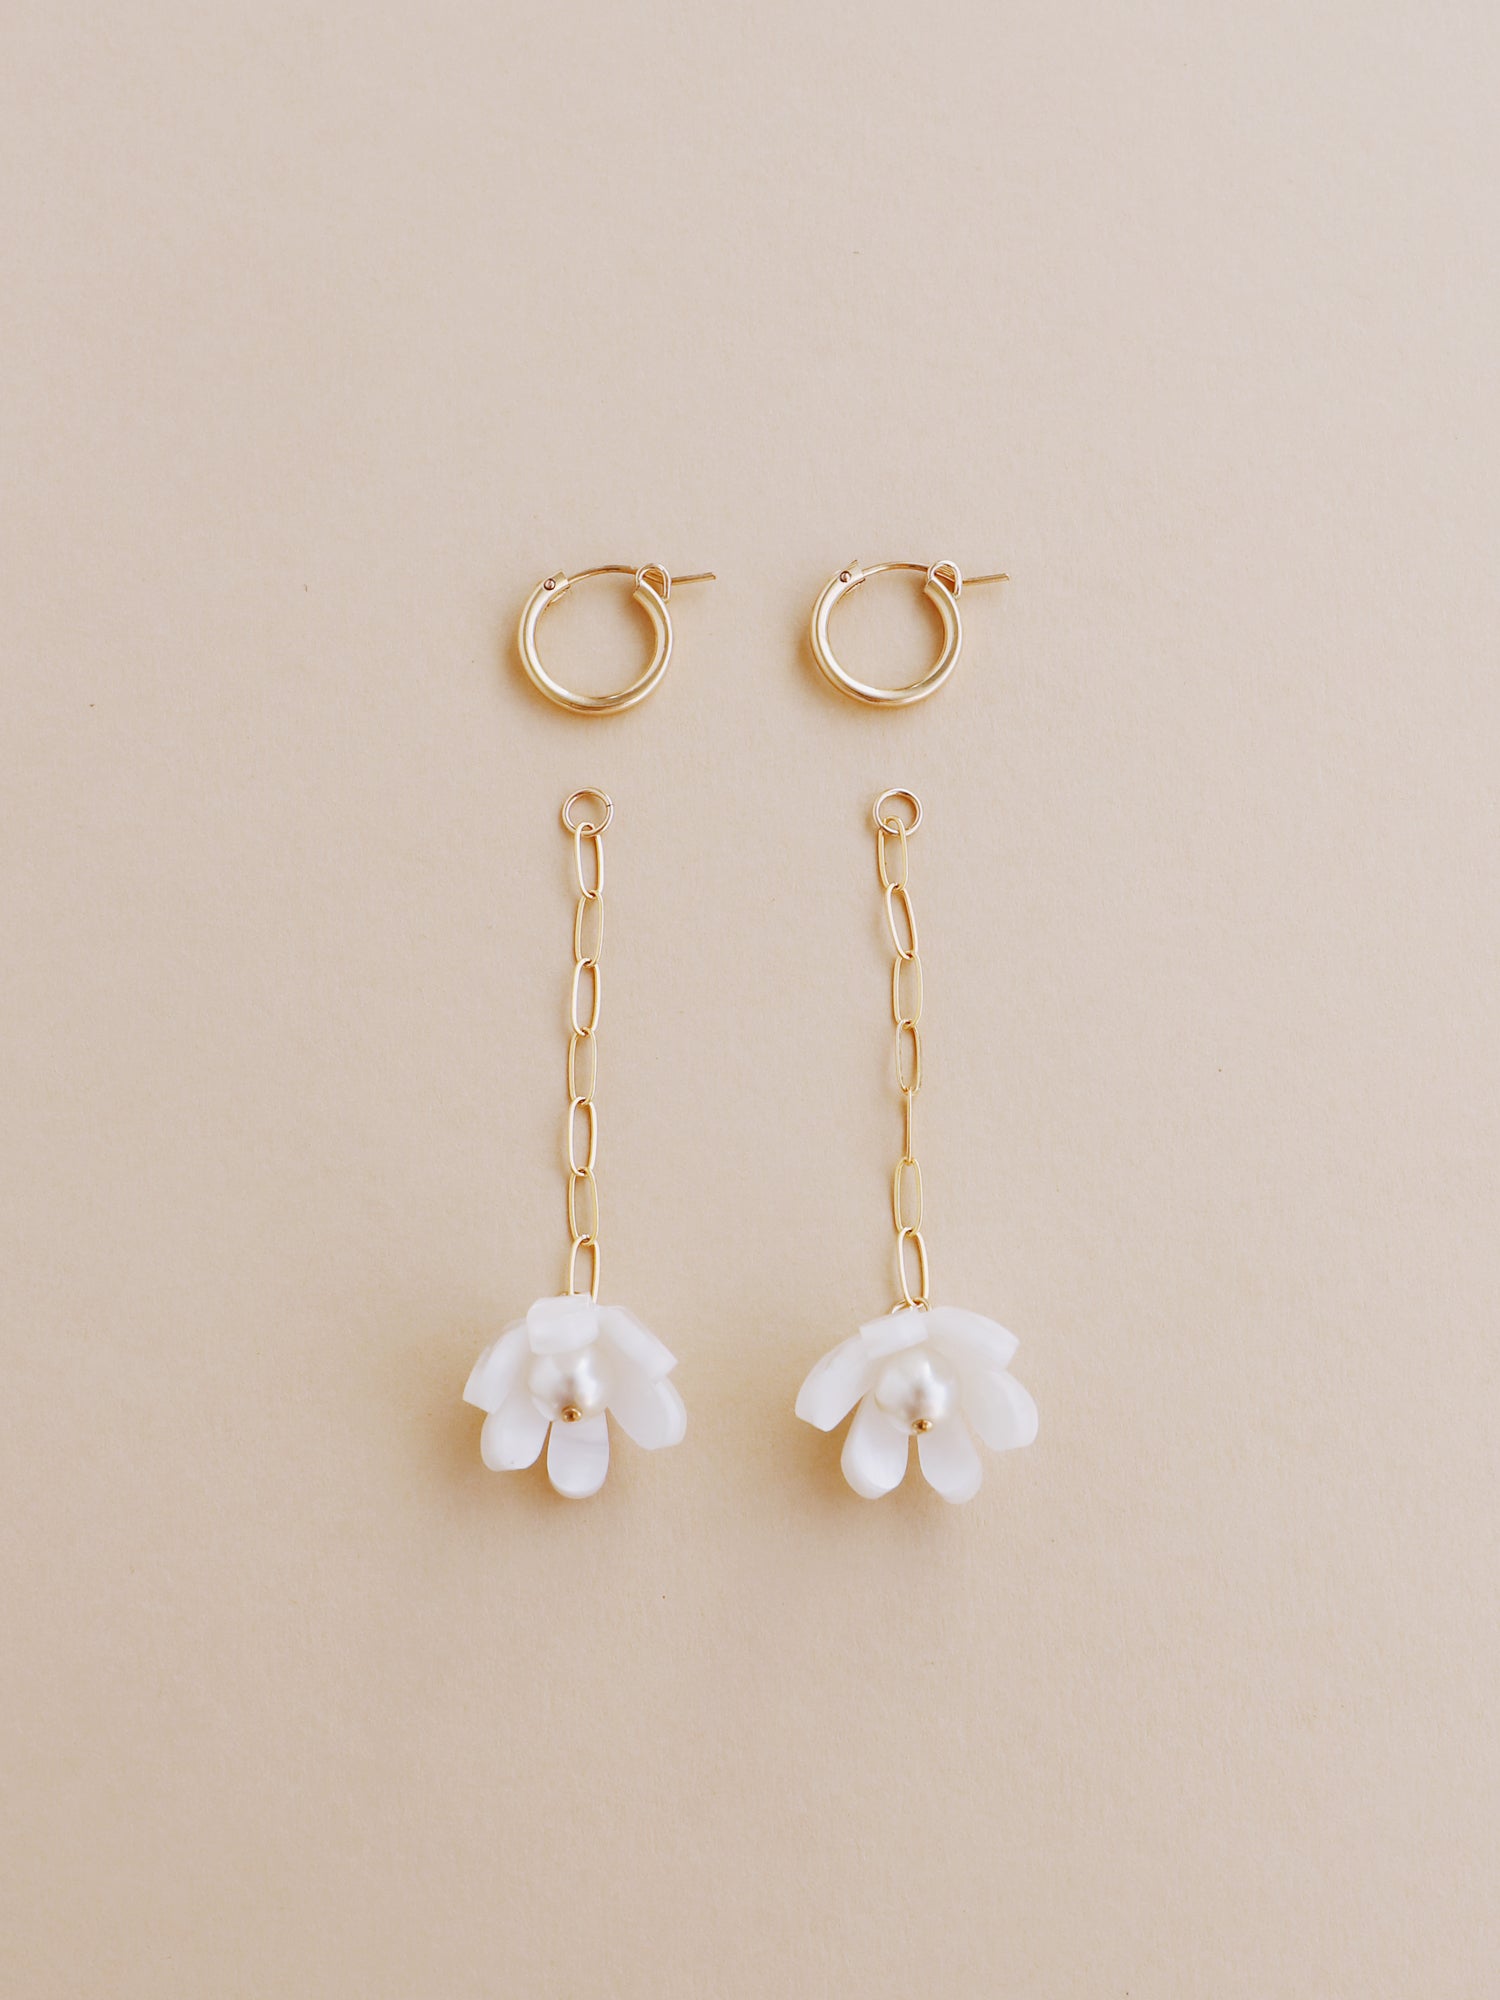 White, sculptural tulip drop hoop earrings. Made from heat-formed acrylic with high quality glass pearls and 14k gold-filled findings. Handmade in the UK by Wolf & Moon